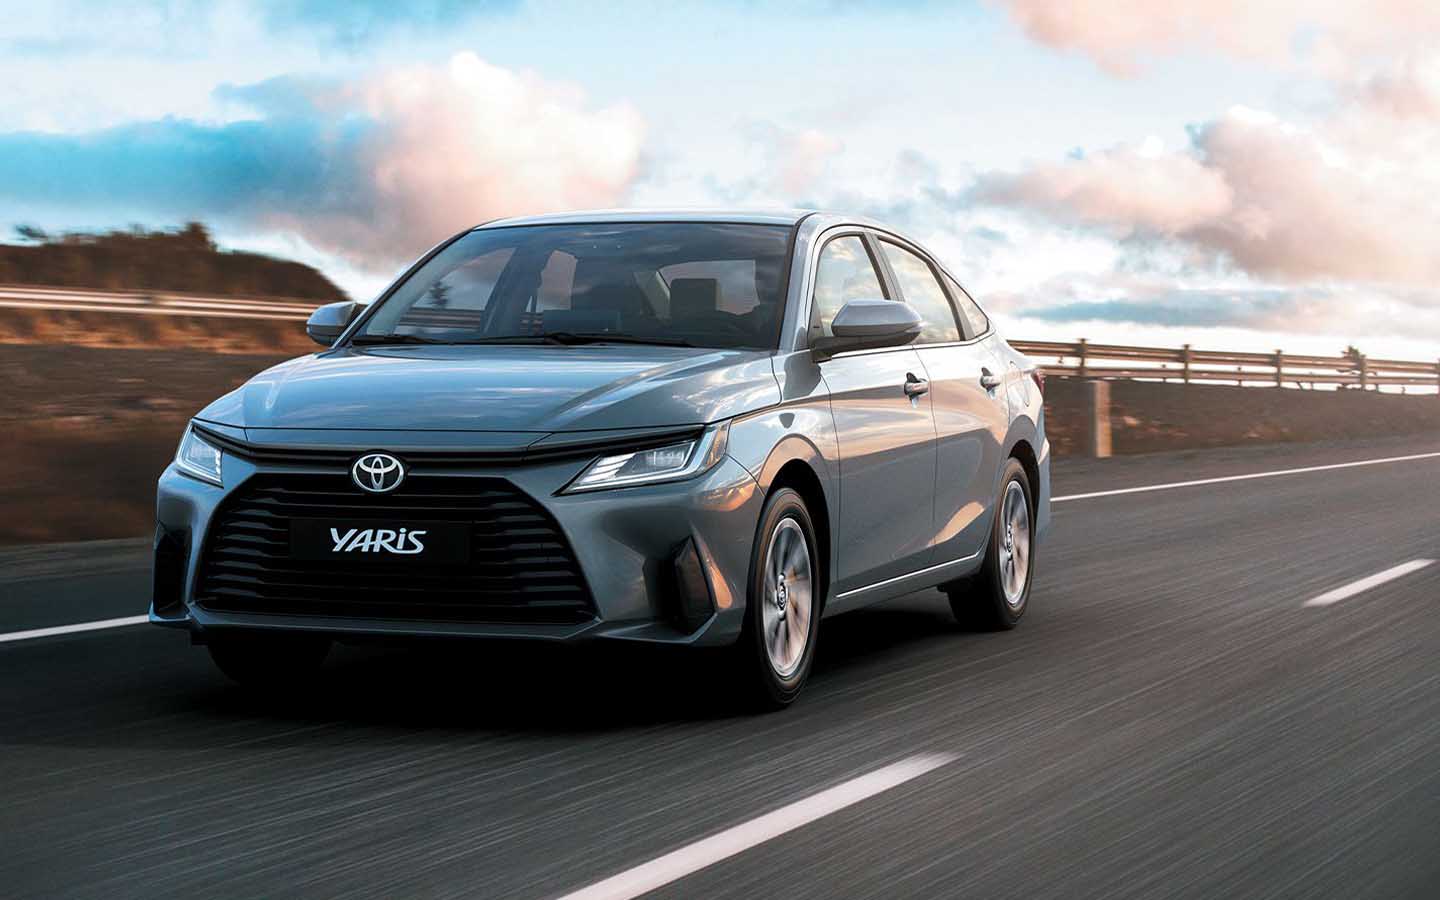 Toyota Yaris is on the 3rd rank in the list of popular used Toyota sedans in the UAE